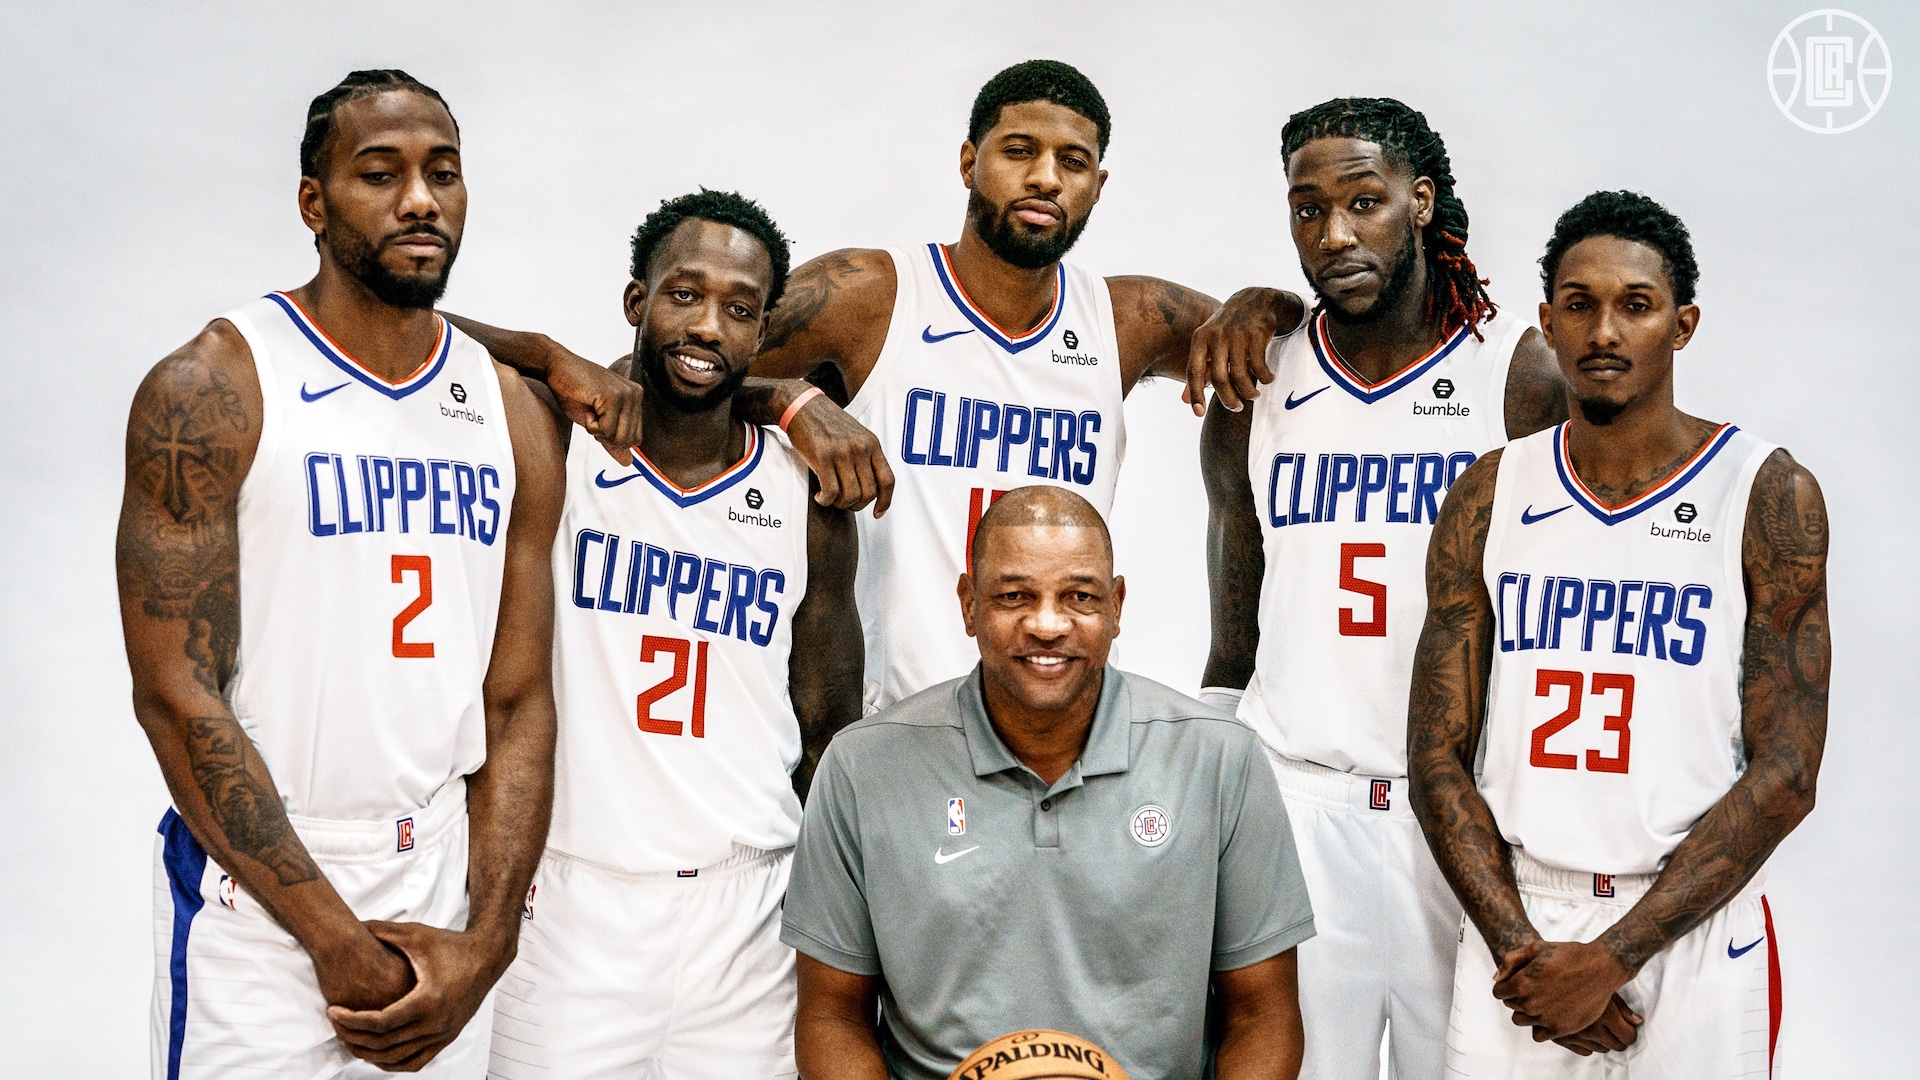 The clippers are amongst the top 10 most expensive teams in nba